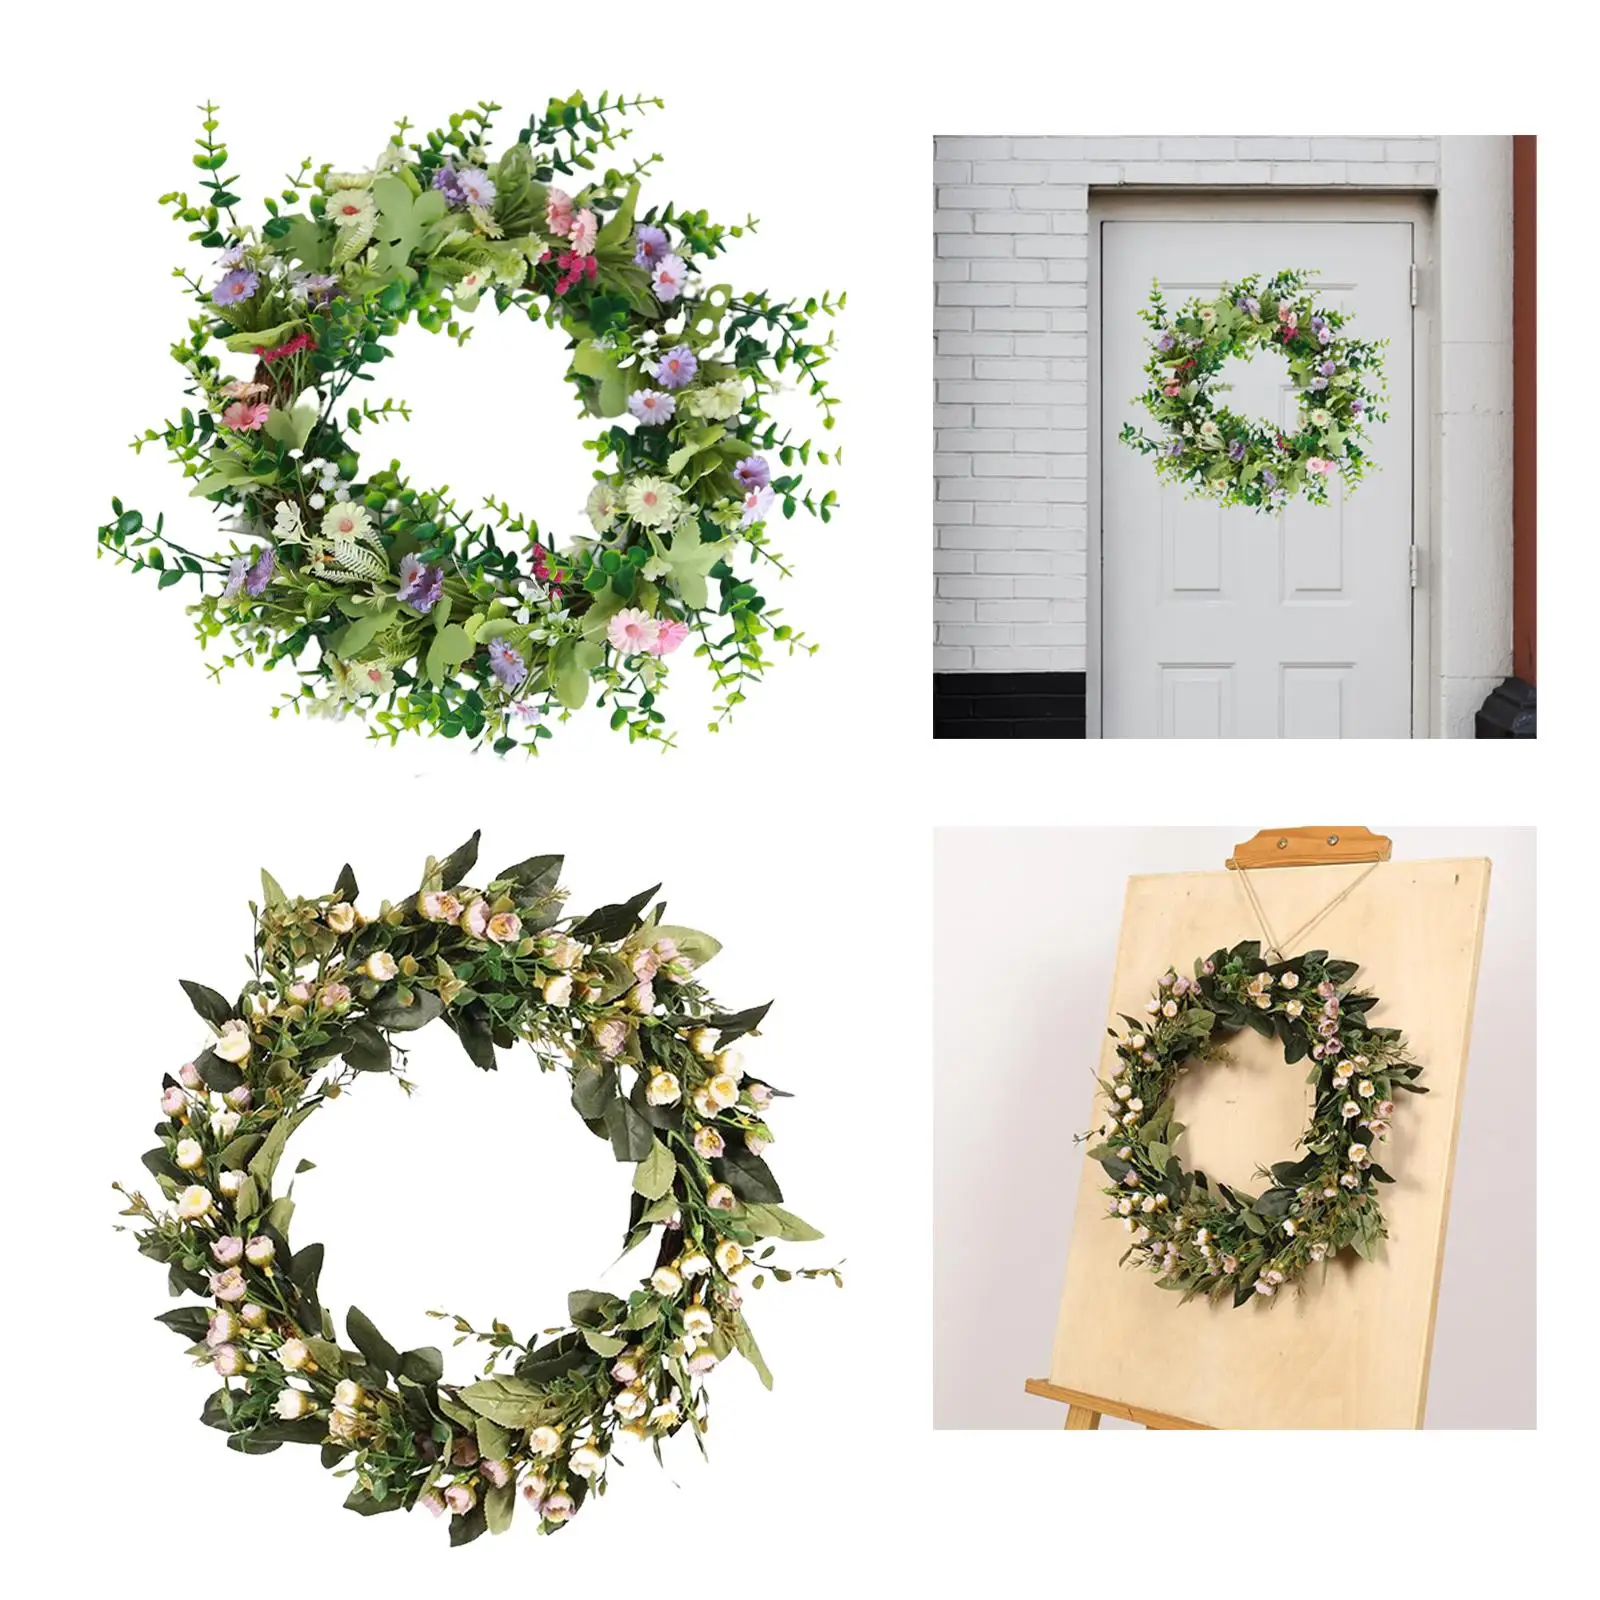 2x Handmade Flower Wreath Spring Garland Home Decor Door Wreath for Party Valentines Home Office Photo Props Decorations